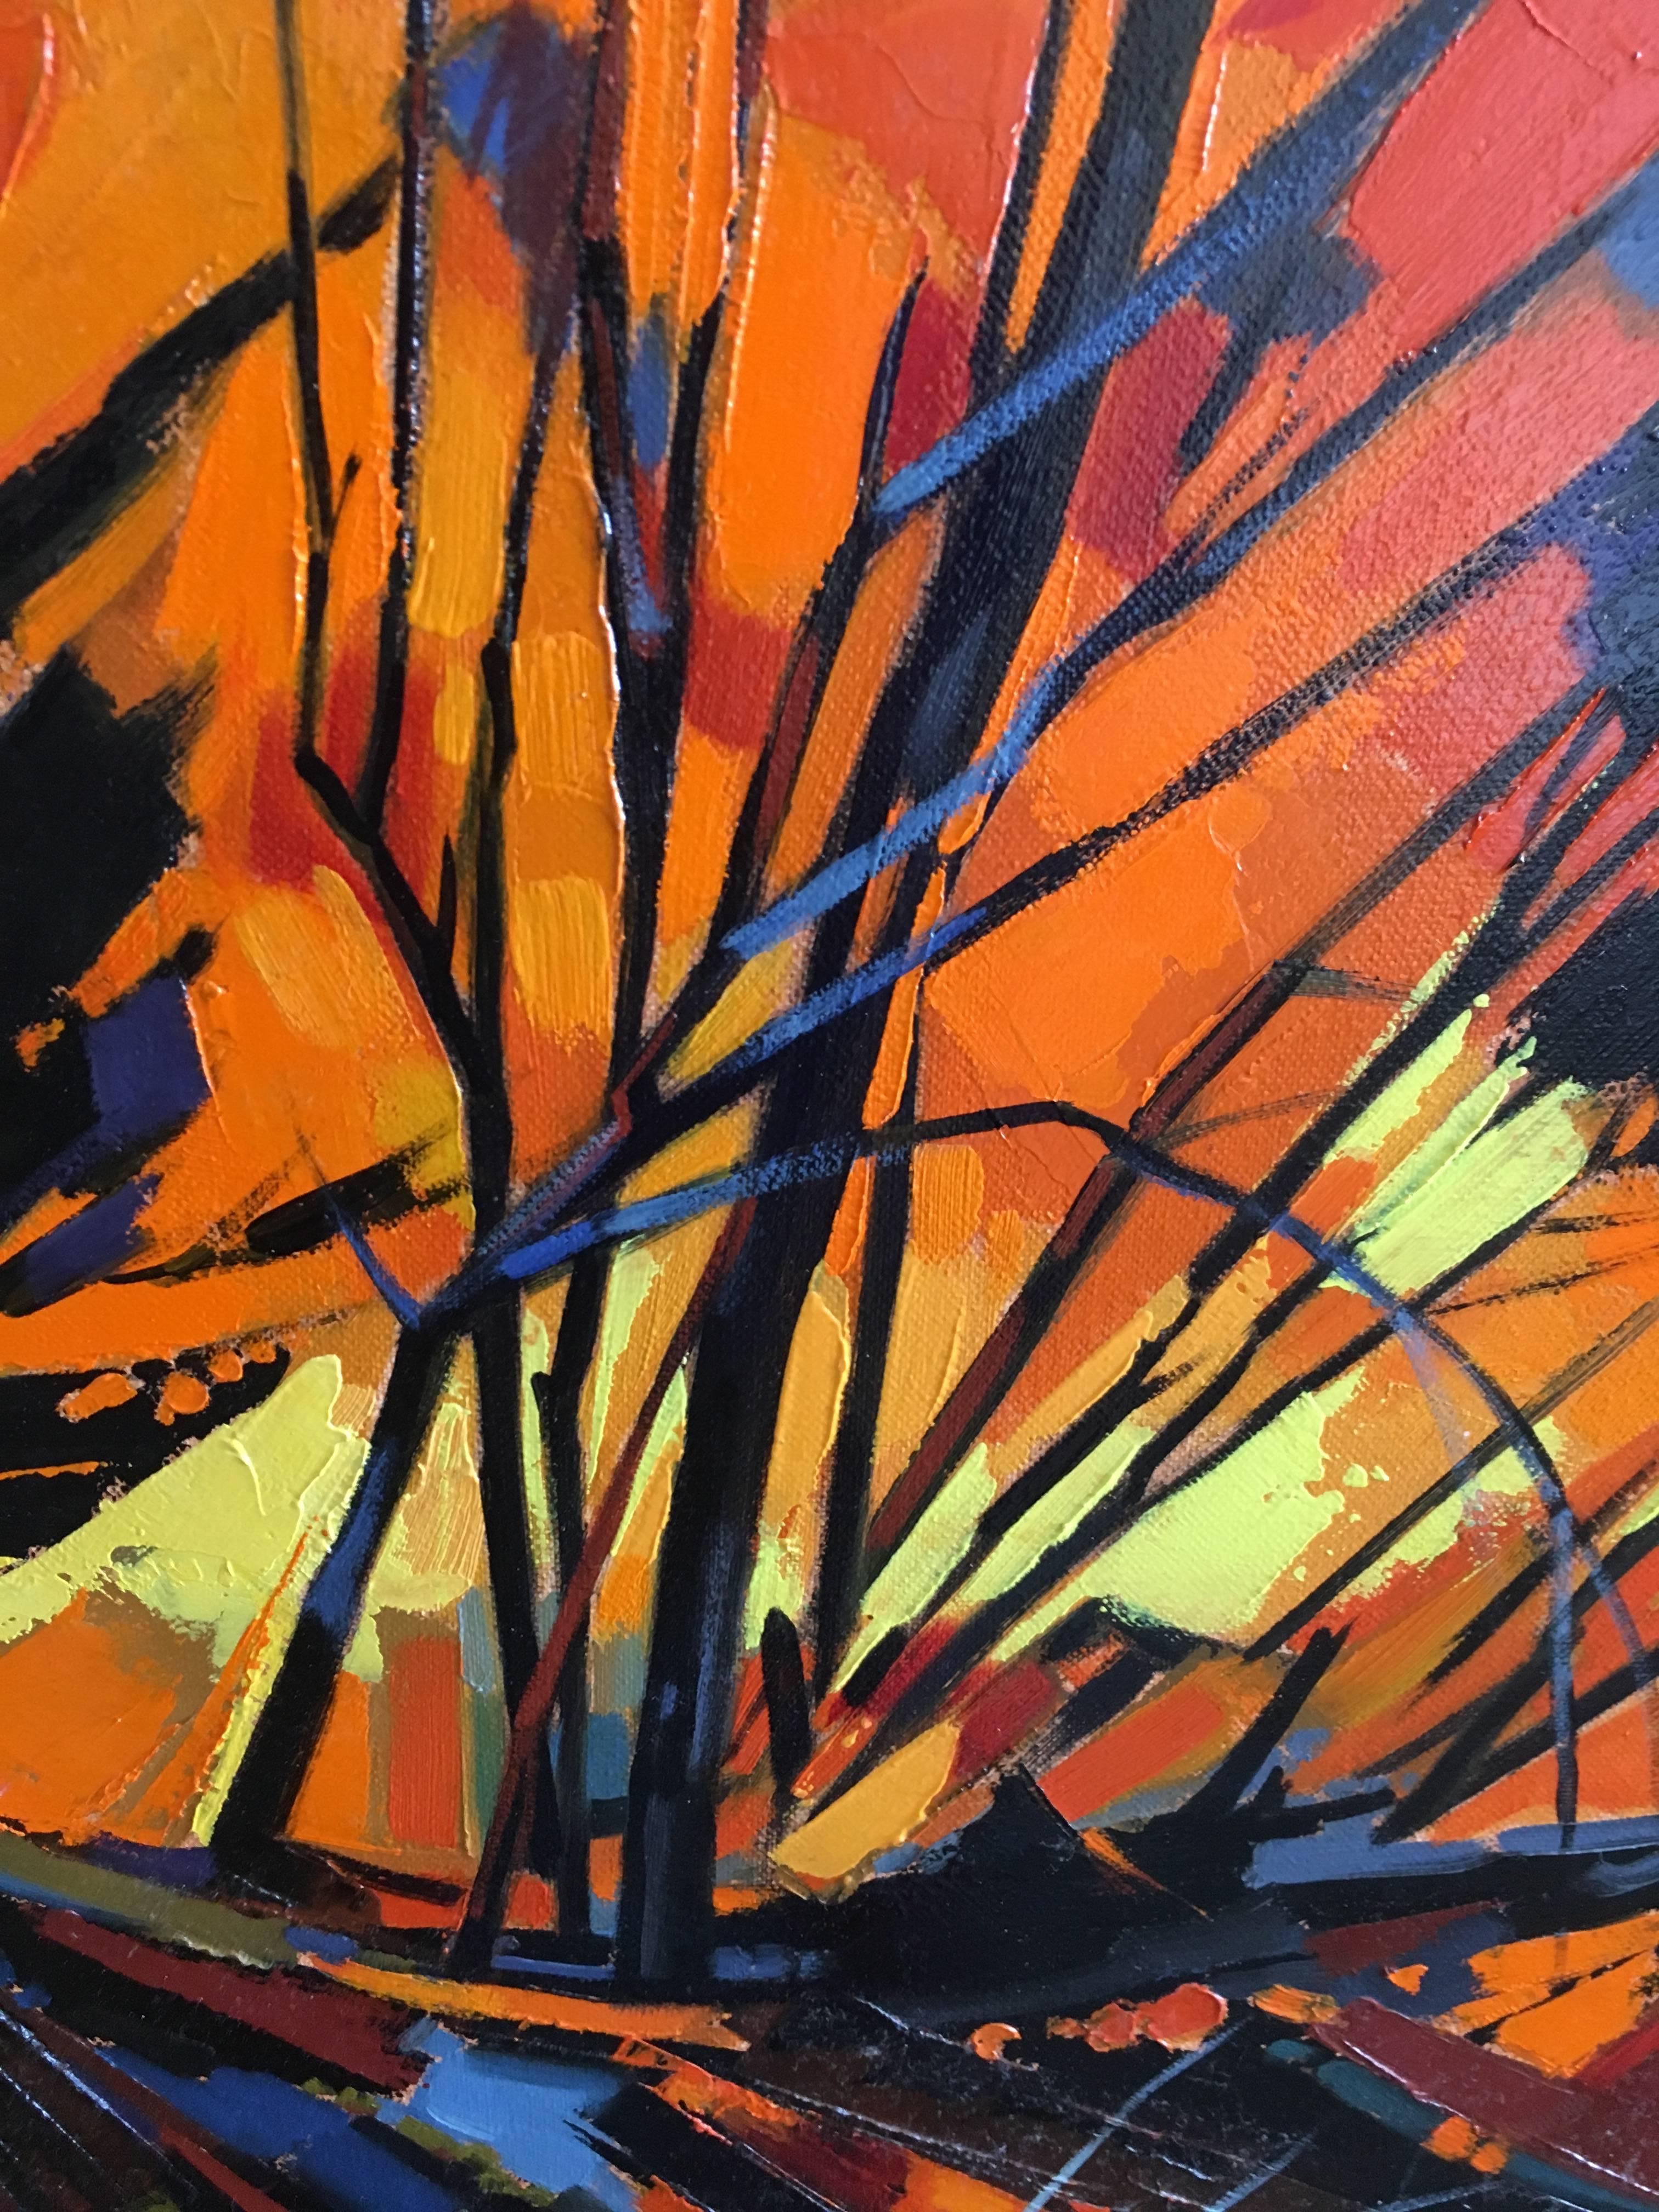 Fire in The Landes forest, expressionist landscape - Black Figurative Painting by Jori Duran